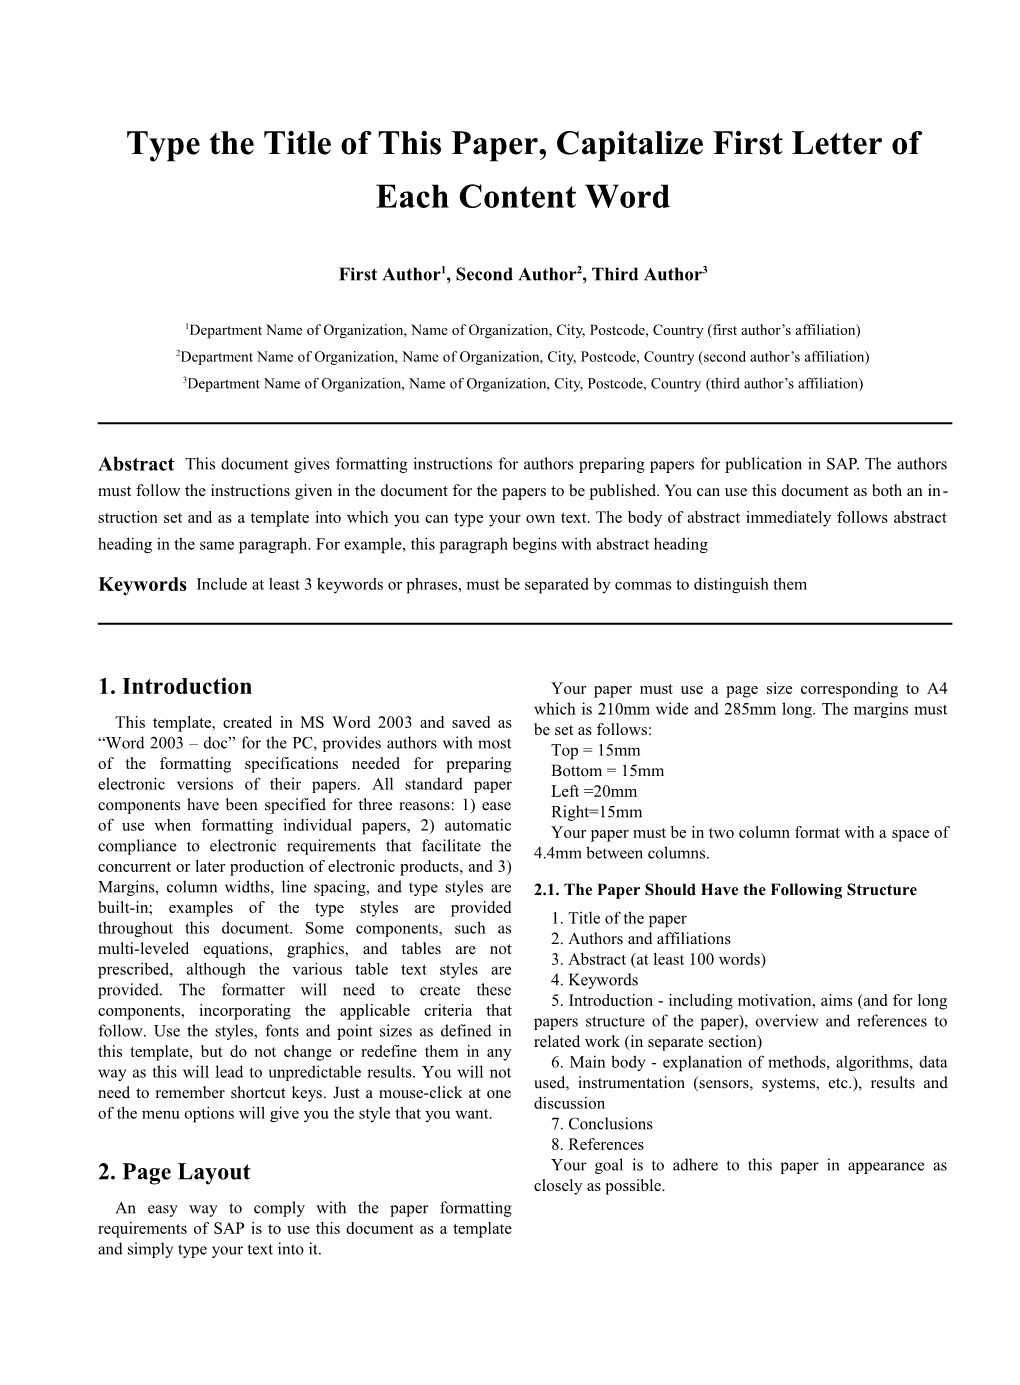 Type the Title of This Paper, Capitalize First Letter of Each Content Word